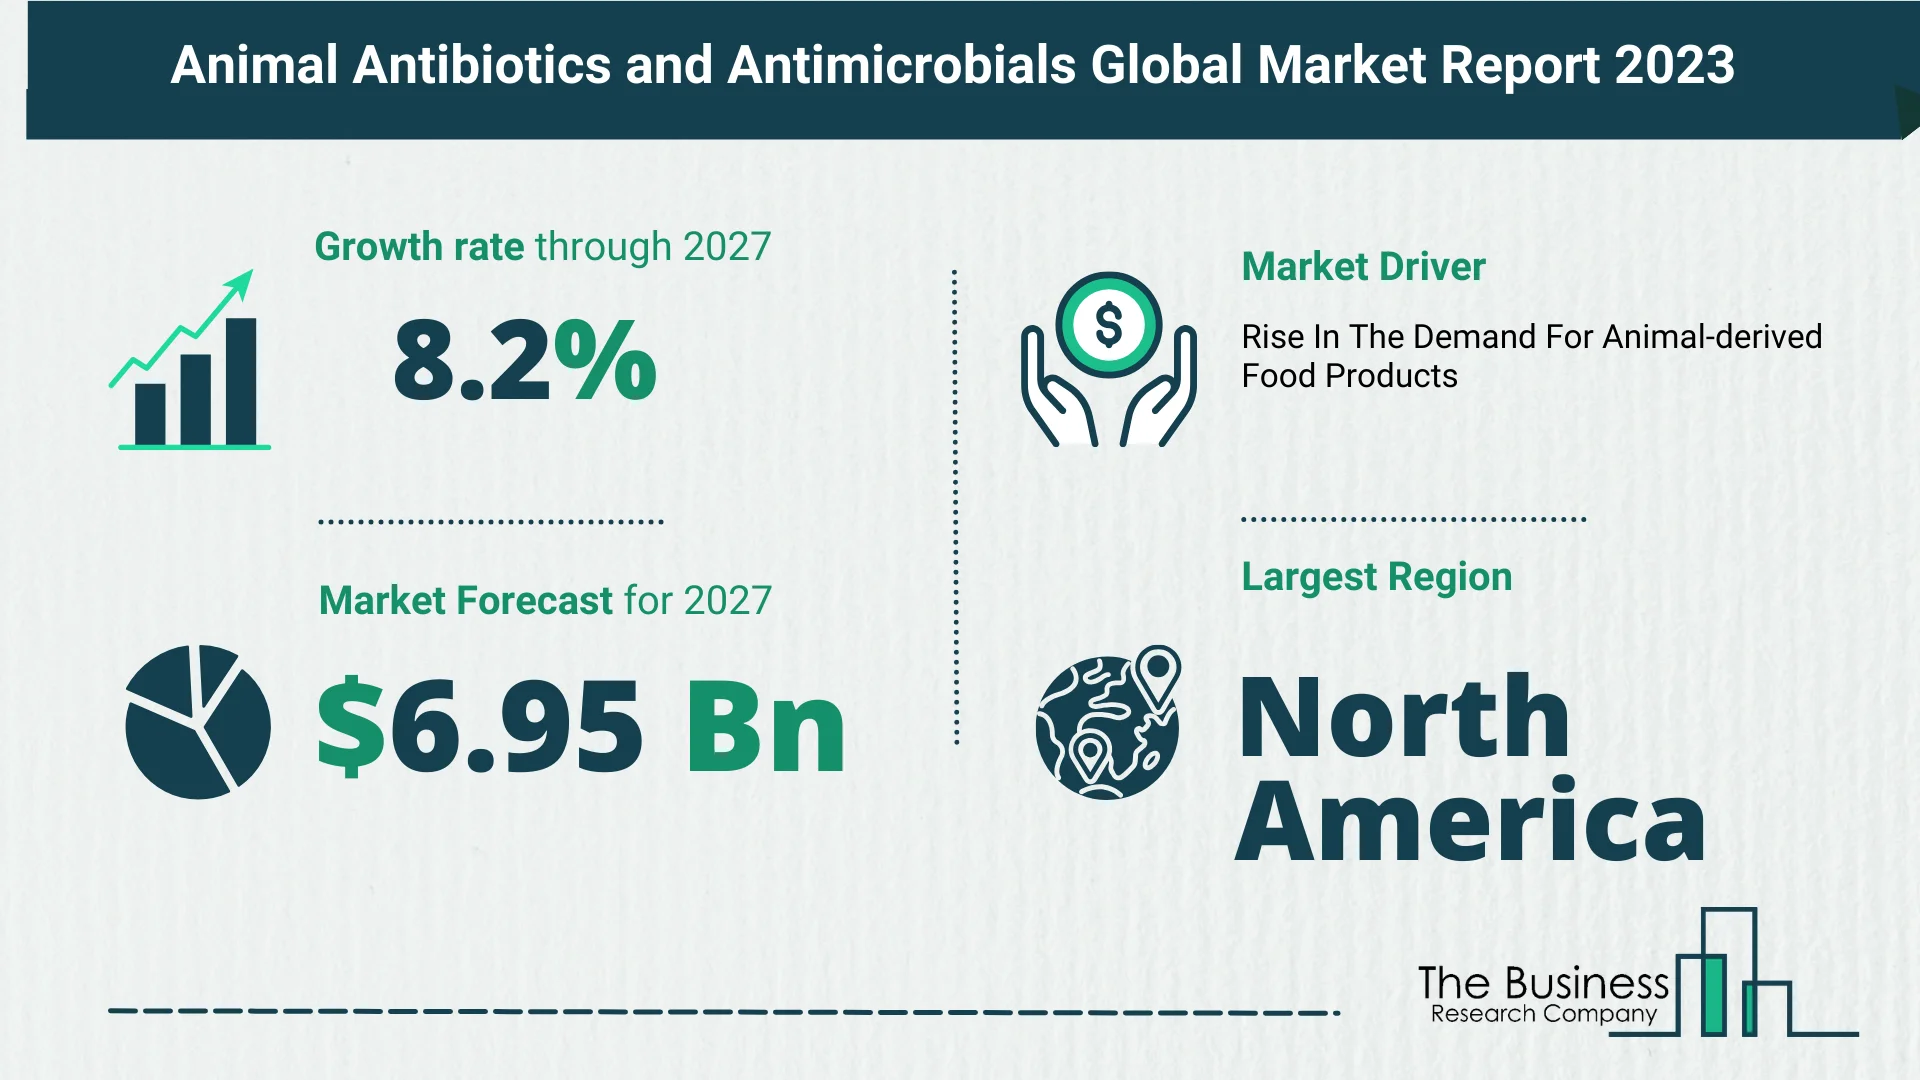 Future Growth Forecast For The Animal Antibiotics and Antimicrobials Global Market 2023-2032